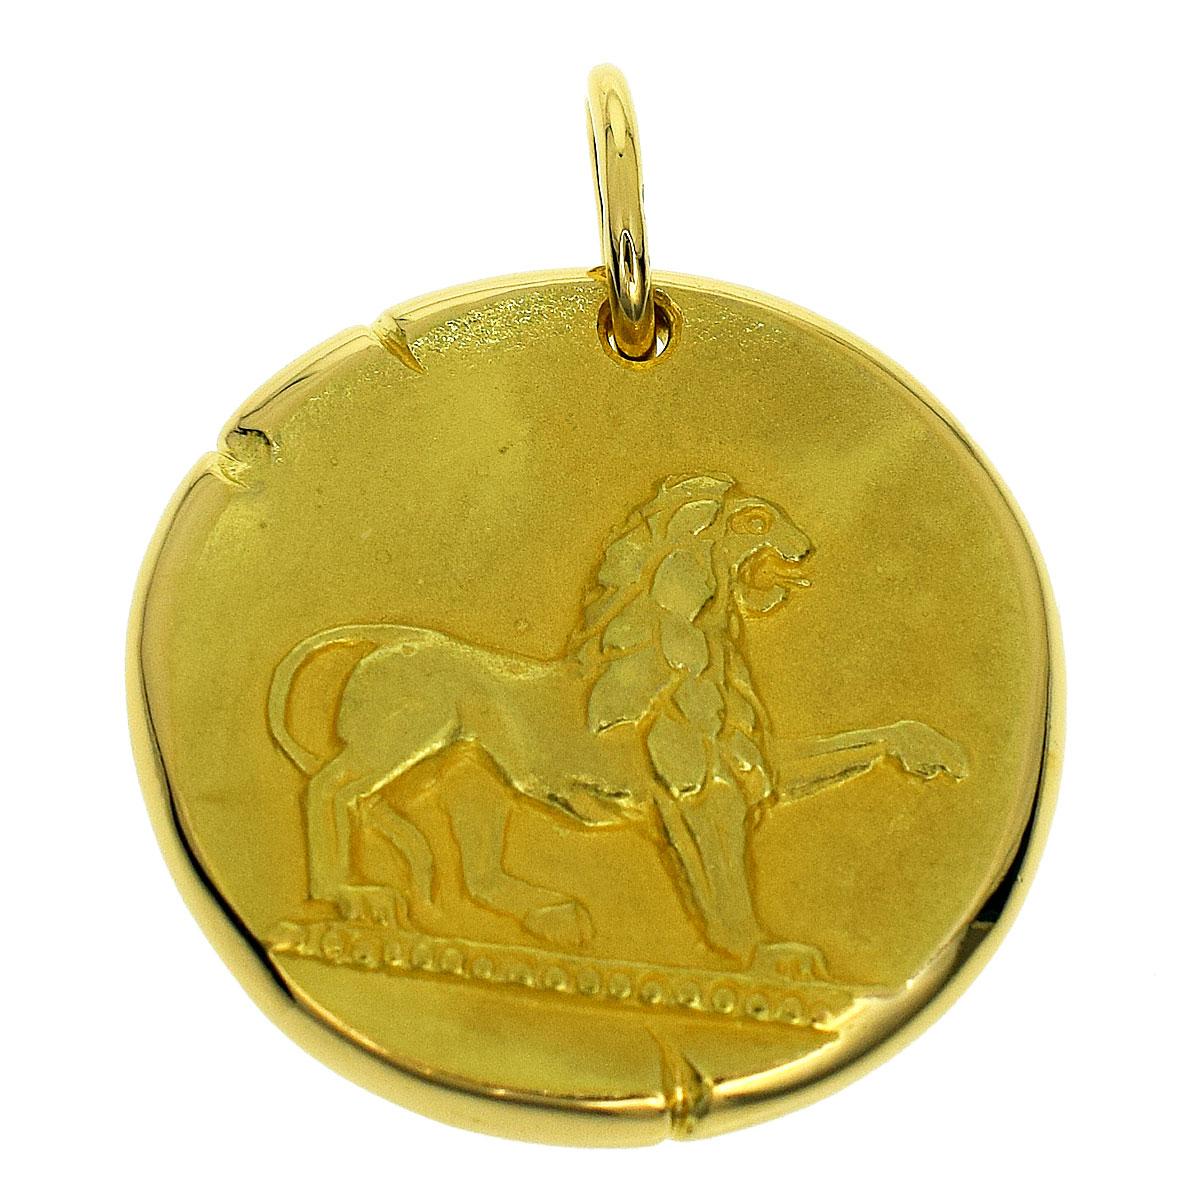 Brand: Van Cleef&Arpels
Name:Leo Zodiac pendant top
Material :750 K18 YG yellow gold
Weight:18.3g（Approx）
Size: H34mm×W28mm / H1.33in×W1.10in（Approx）
